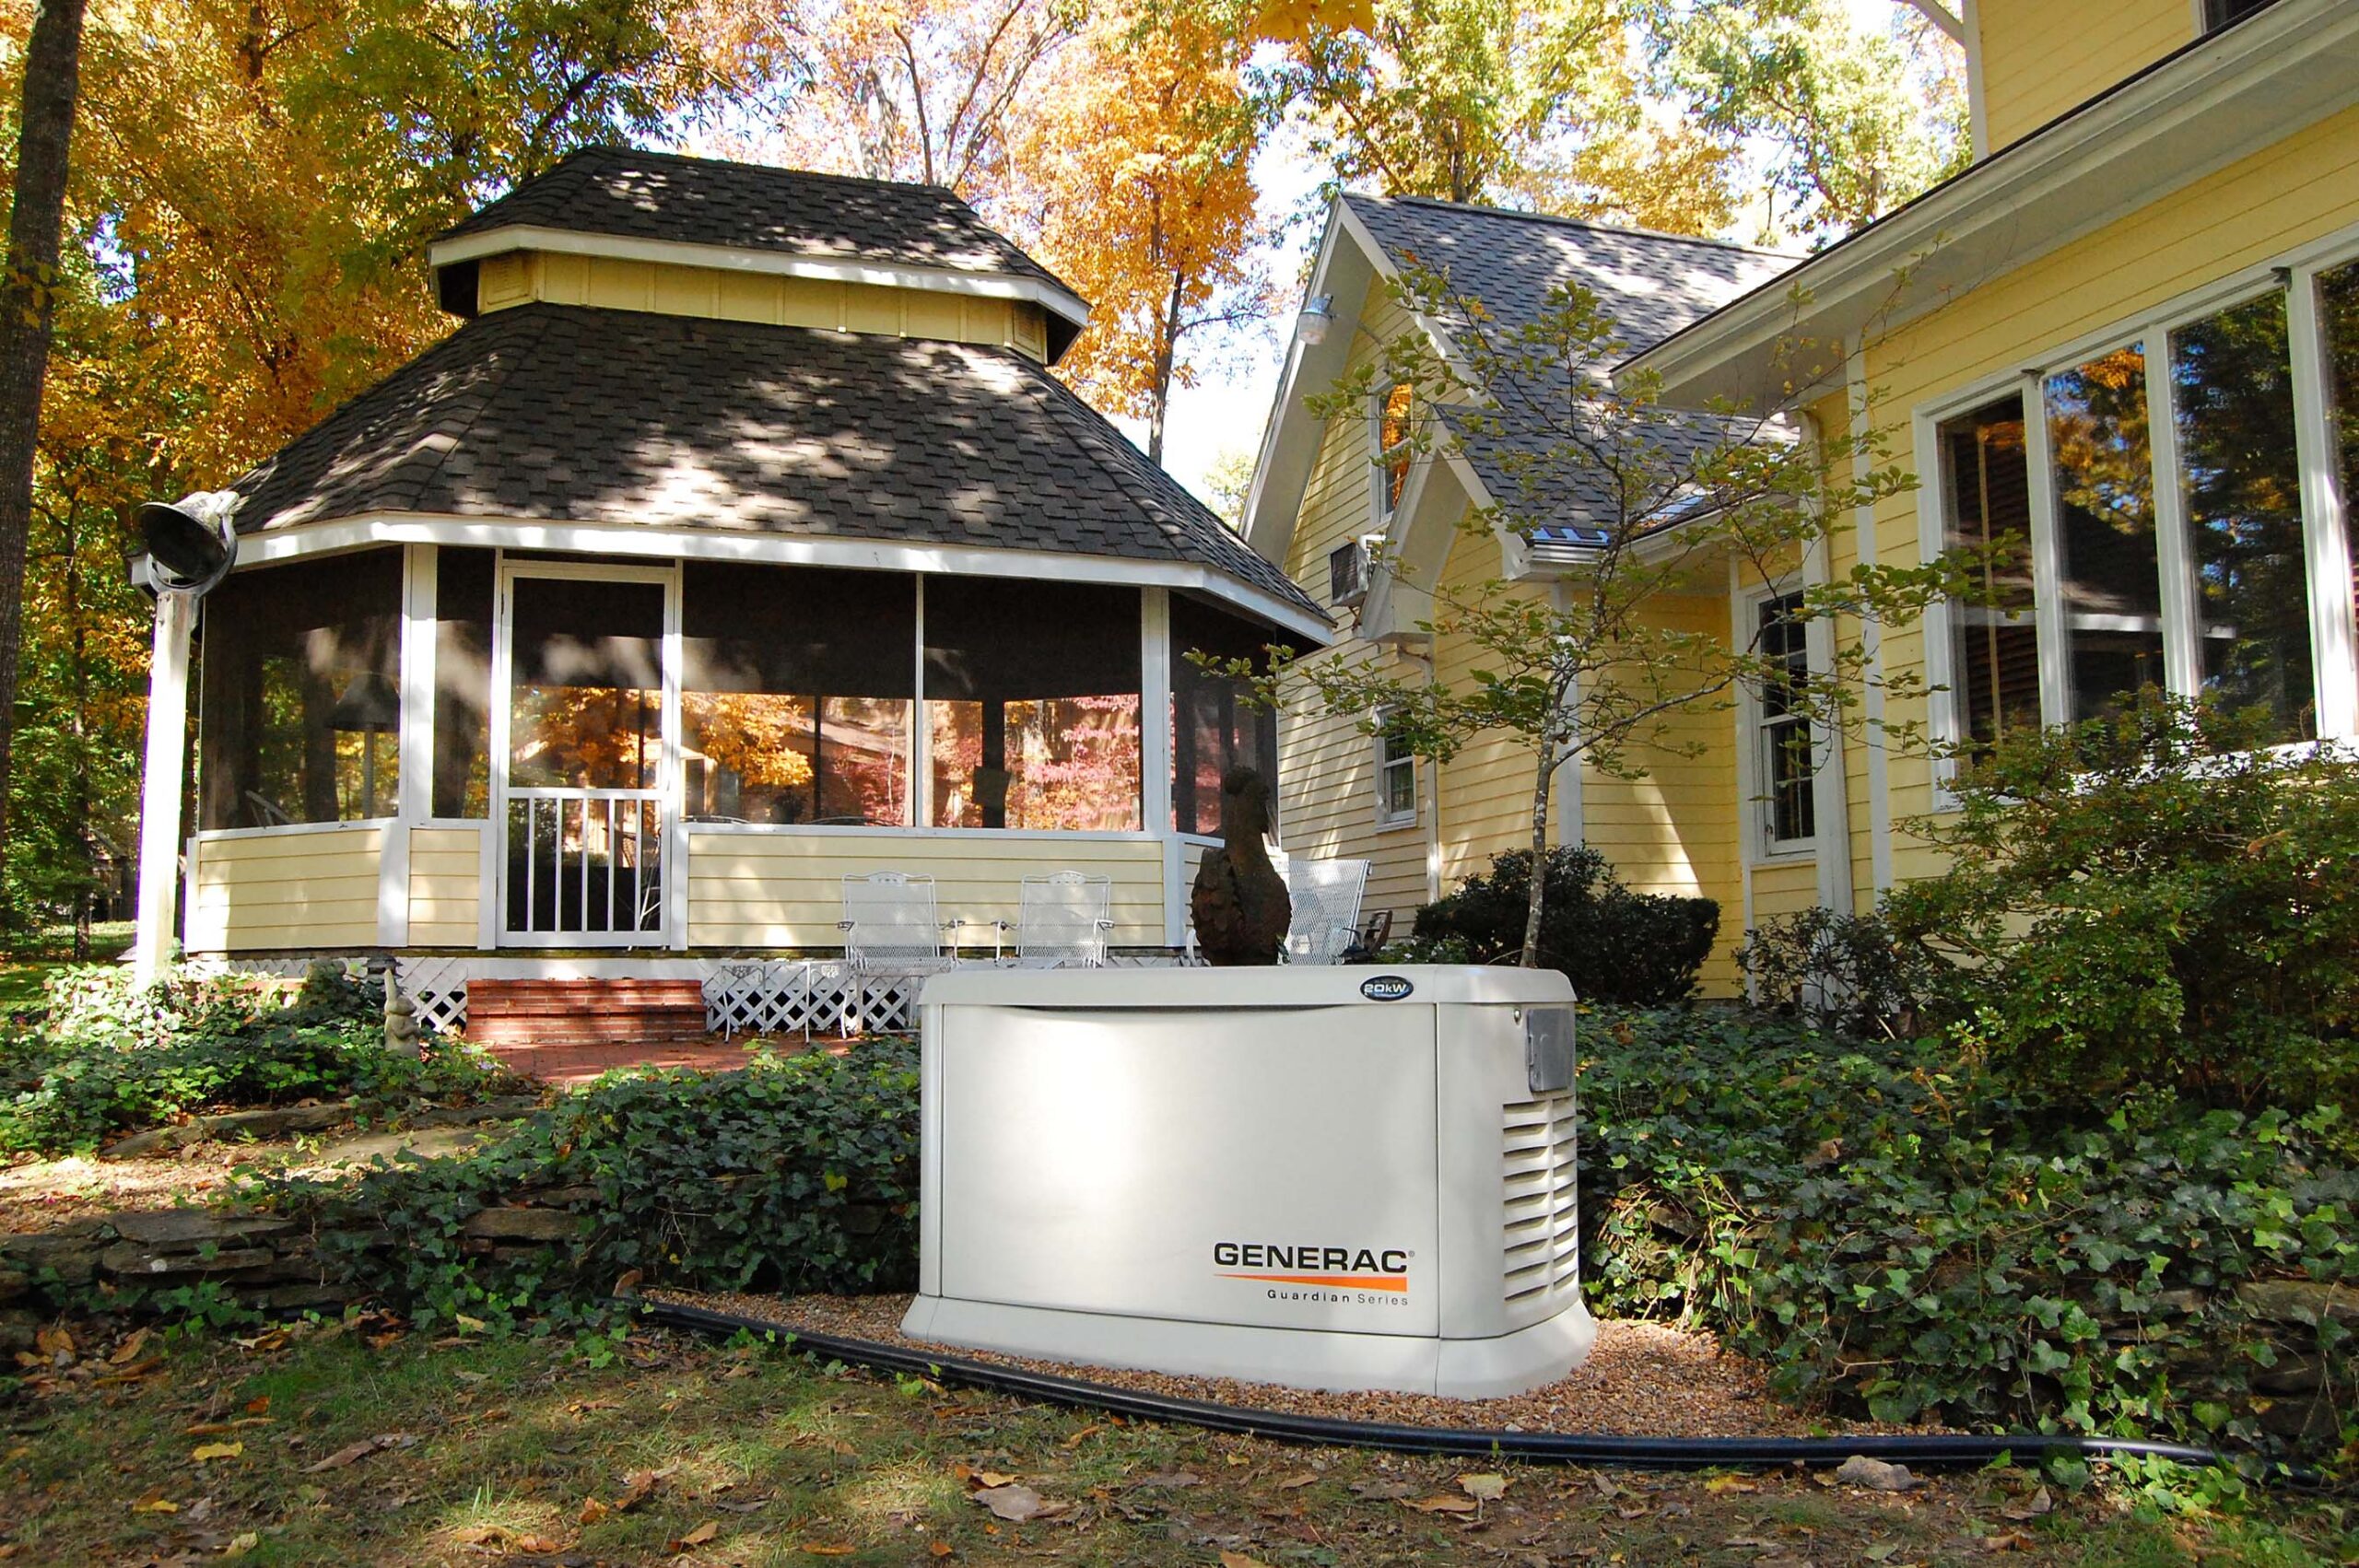 A residential backyard featuring a large generac generator near a house with a screened porch surrounded by autumn trees.